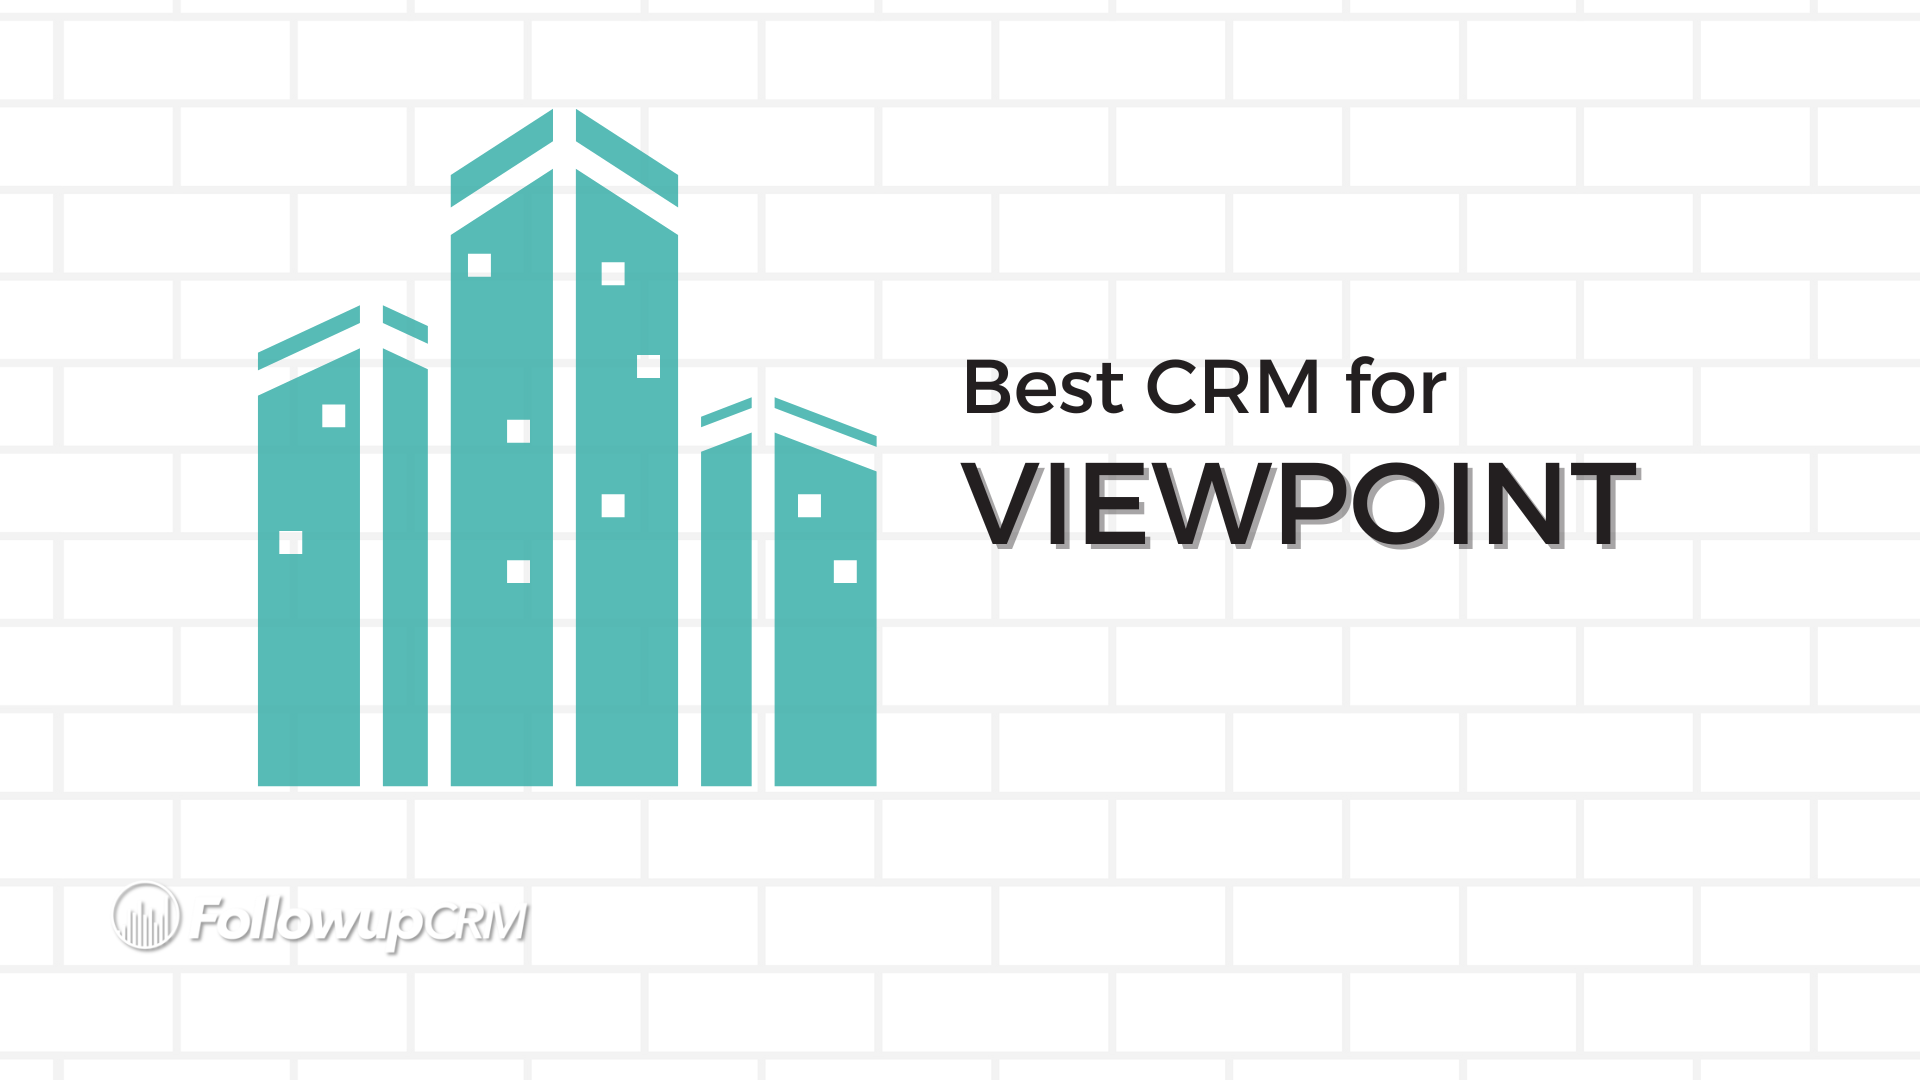 Best CRM for Viewpoint